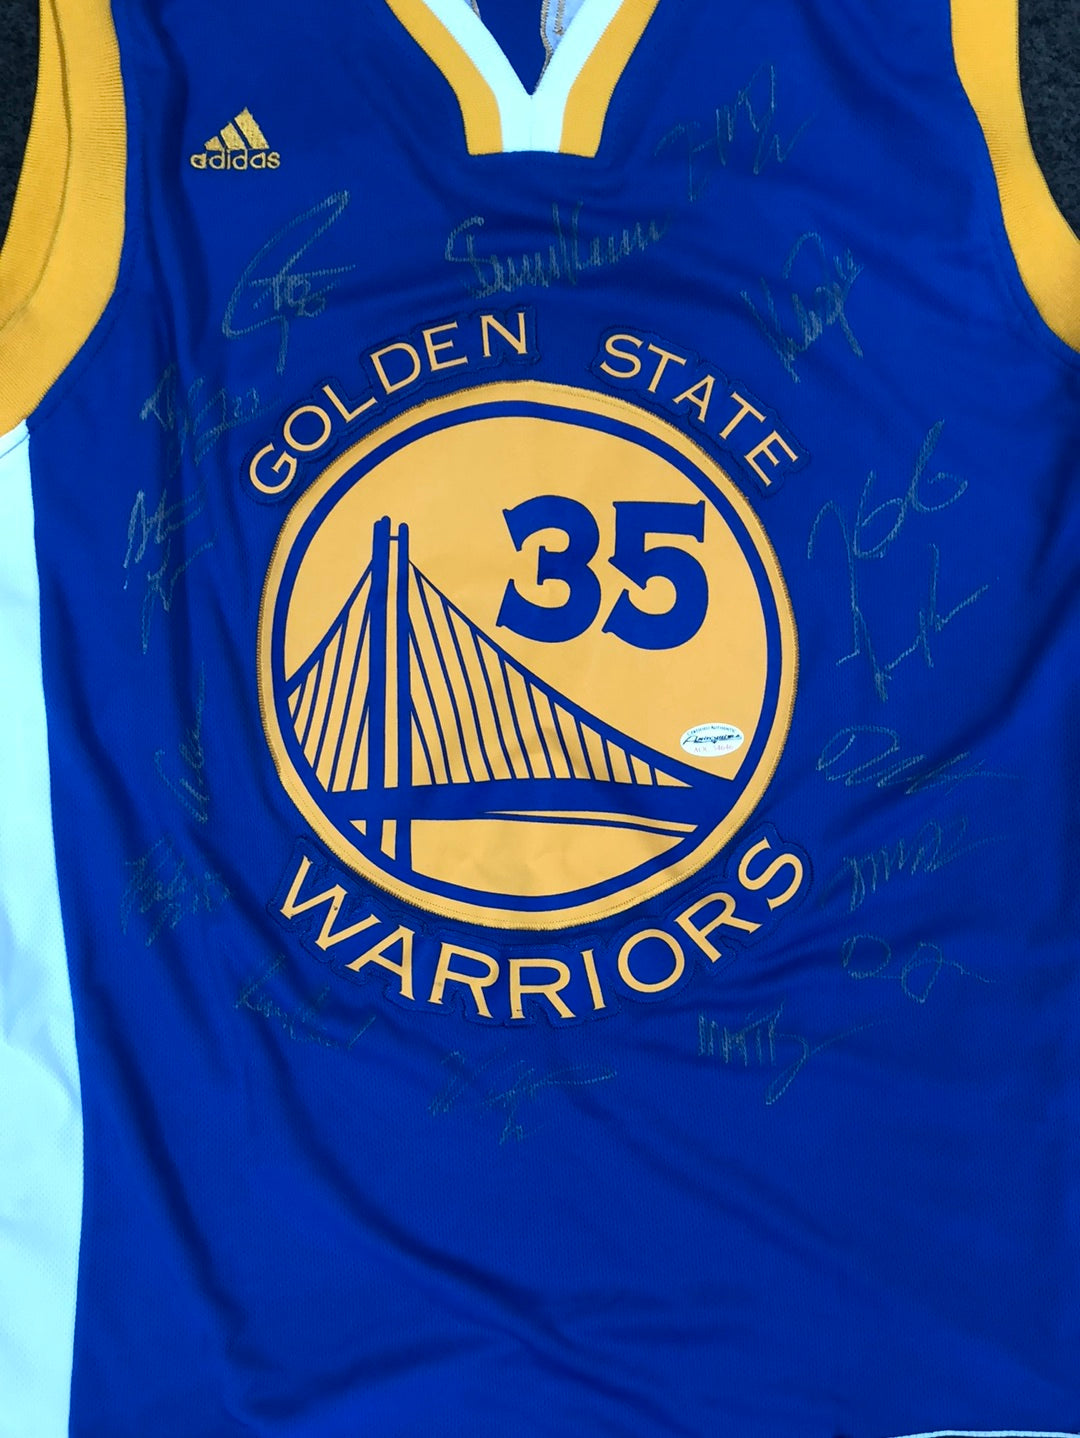 Sold at Auction: GOLDEN STATE WARRIORS 2017 TEAM SIGNED JERSEY